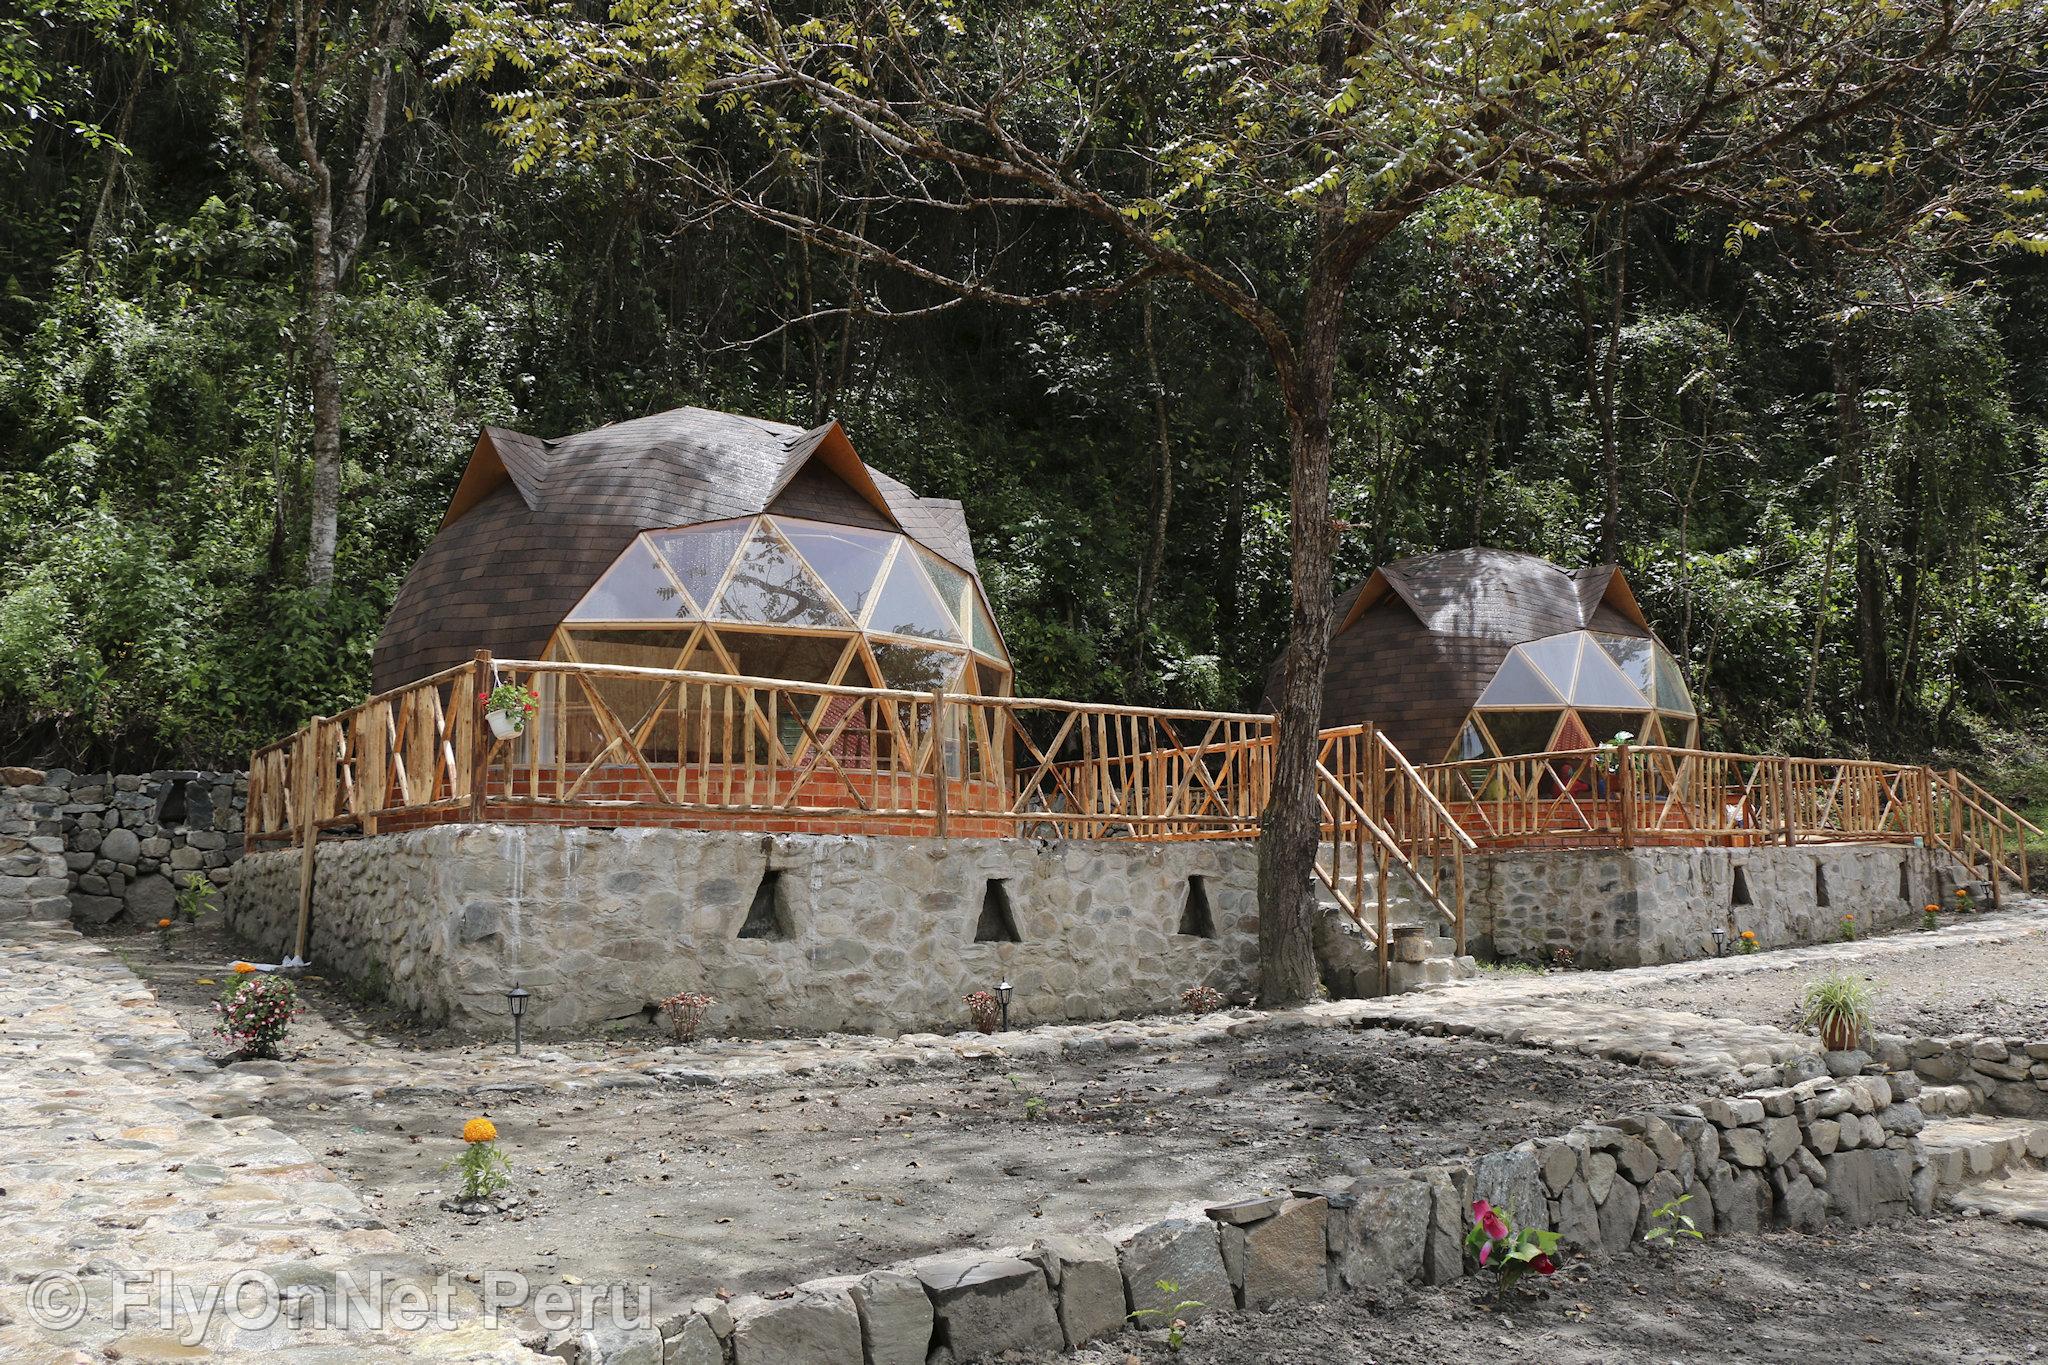 Photo Album: General view of the domes, Ecolodge Majestic